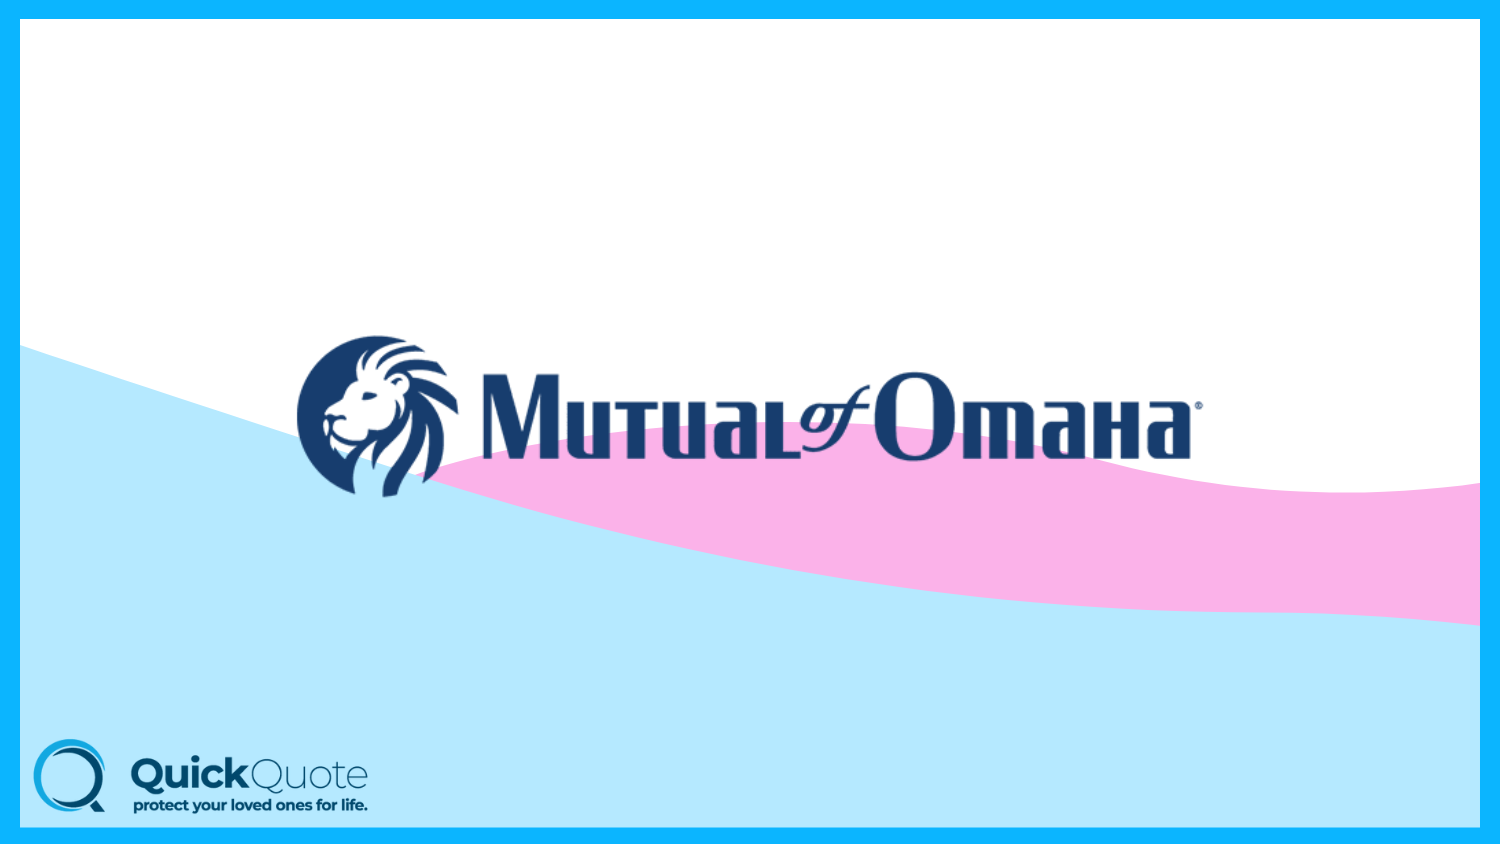 Mutual of Omaha: Best Life Insurance for Siblings